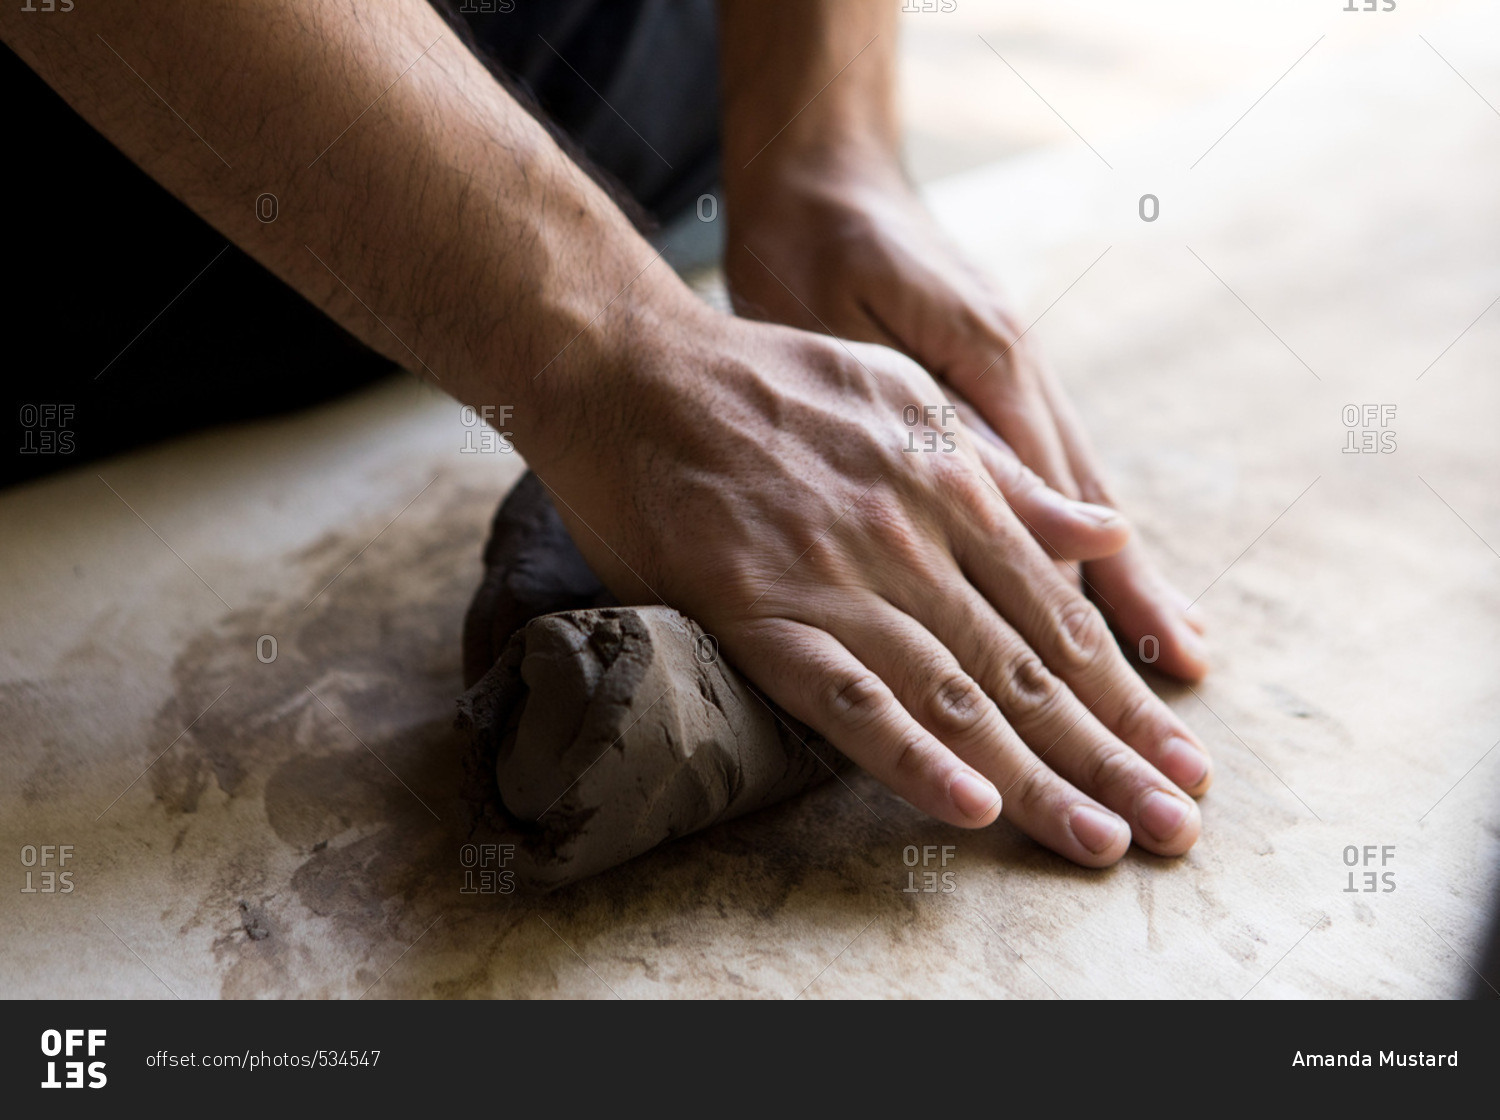 Molding clay with hands stock image. Image of pottery - 101201933